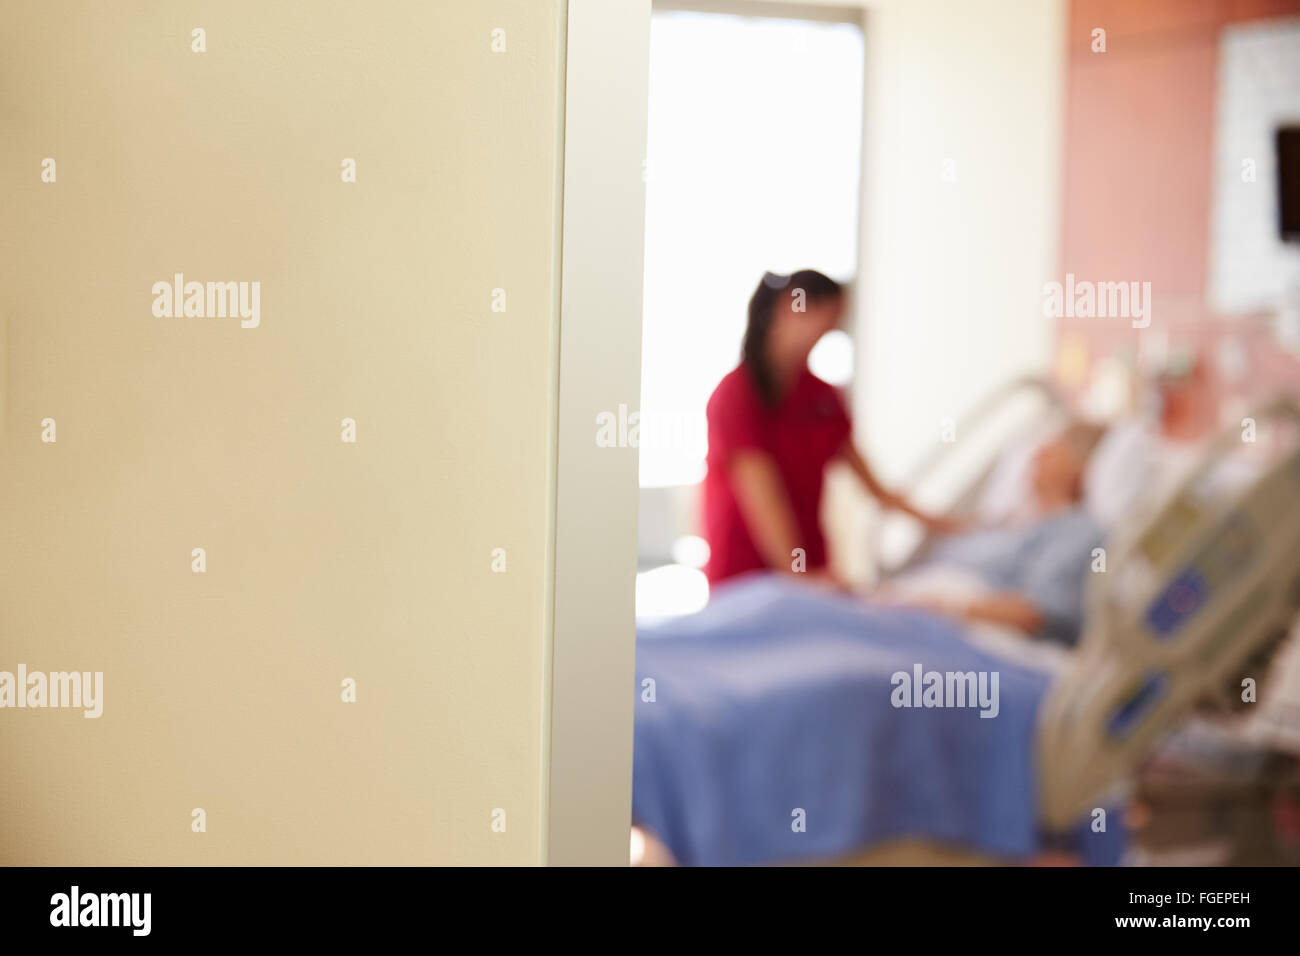 Focus On Hospital Room Sign With Nurse Talking To Patient Stock Photo